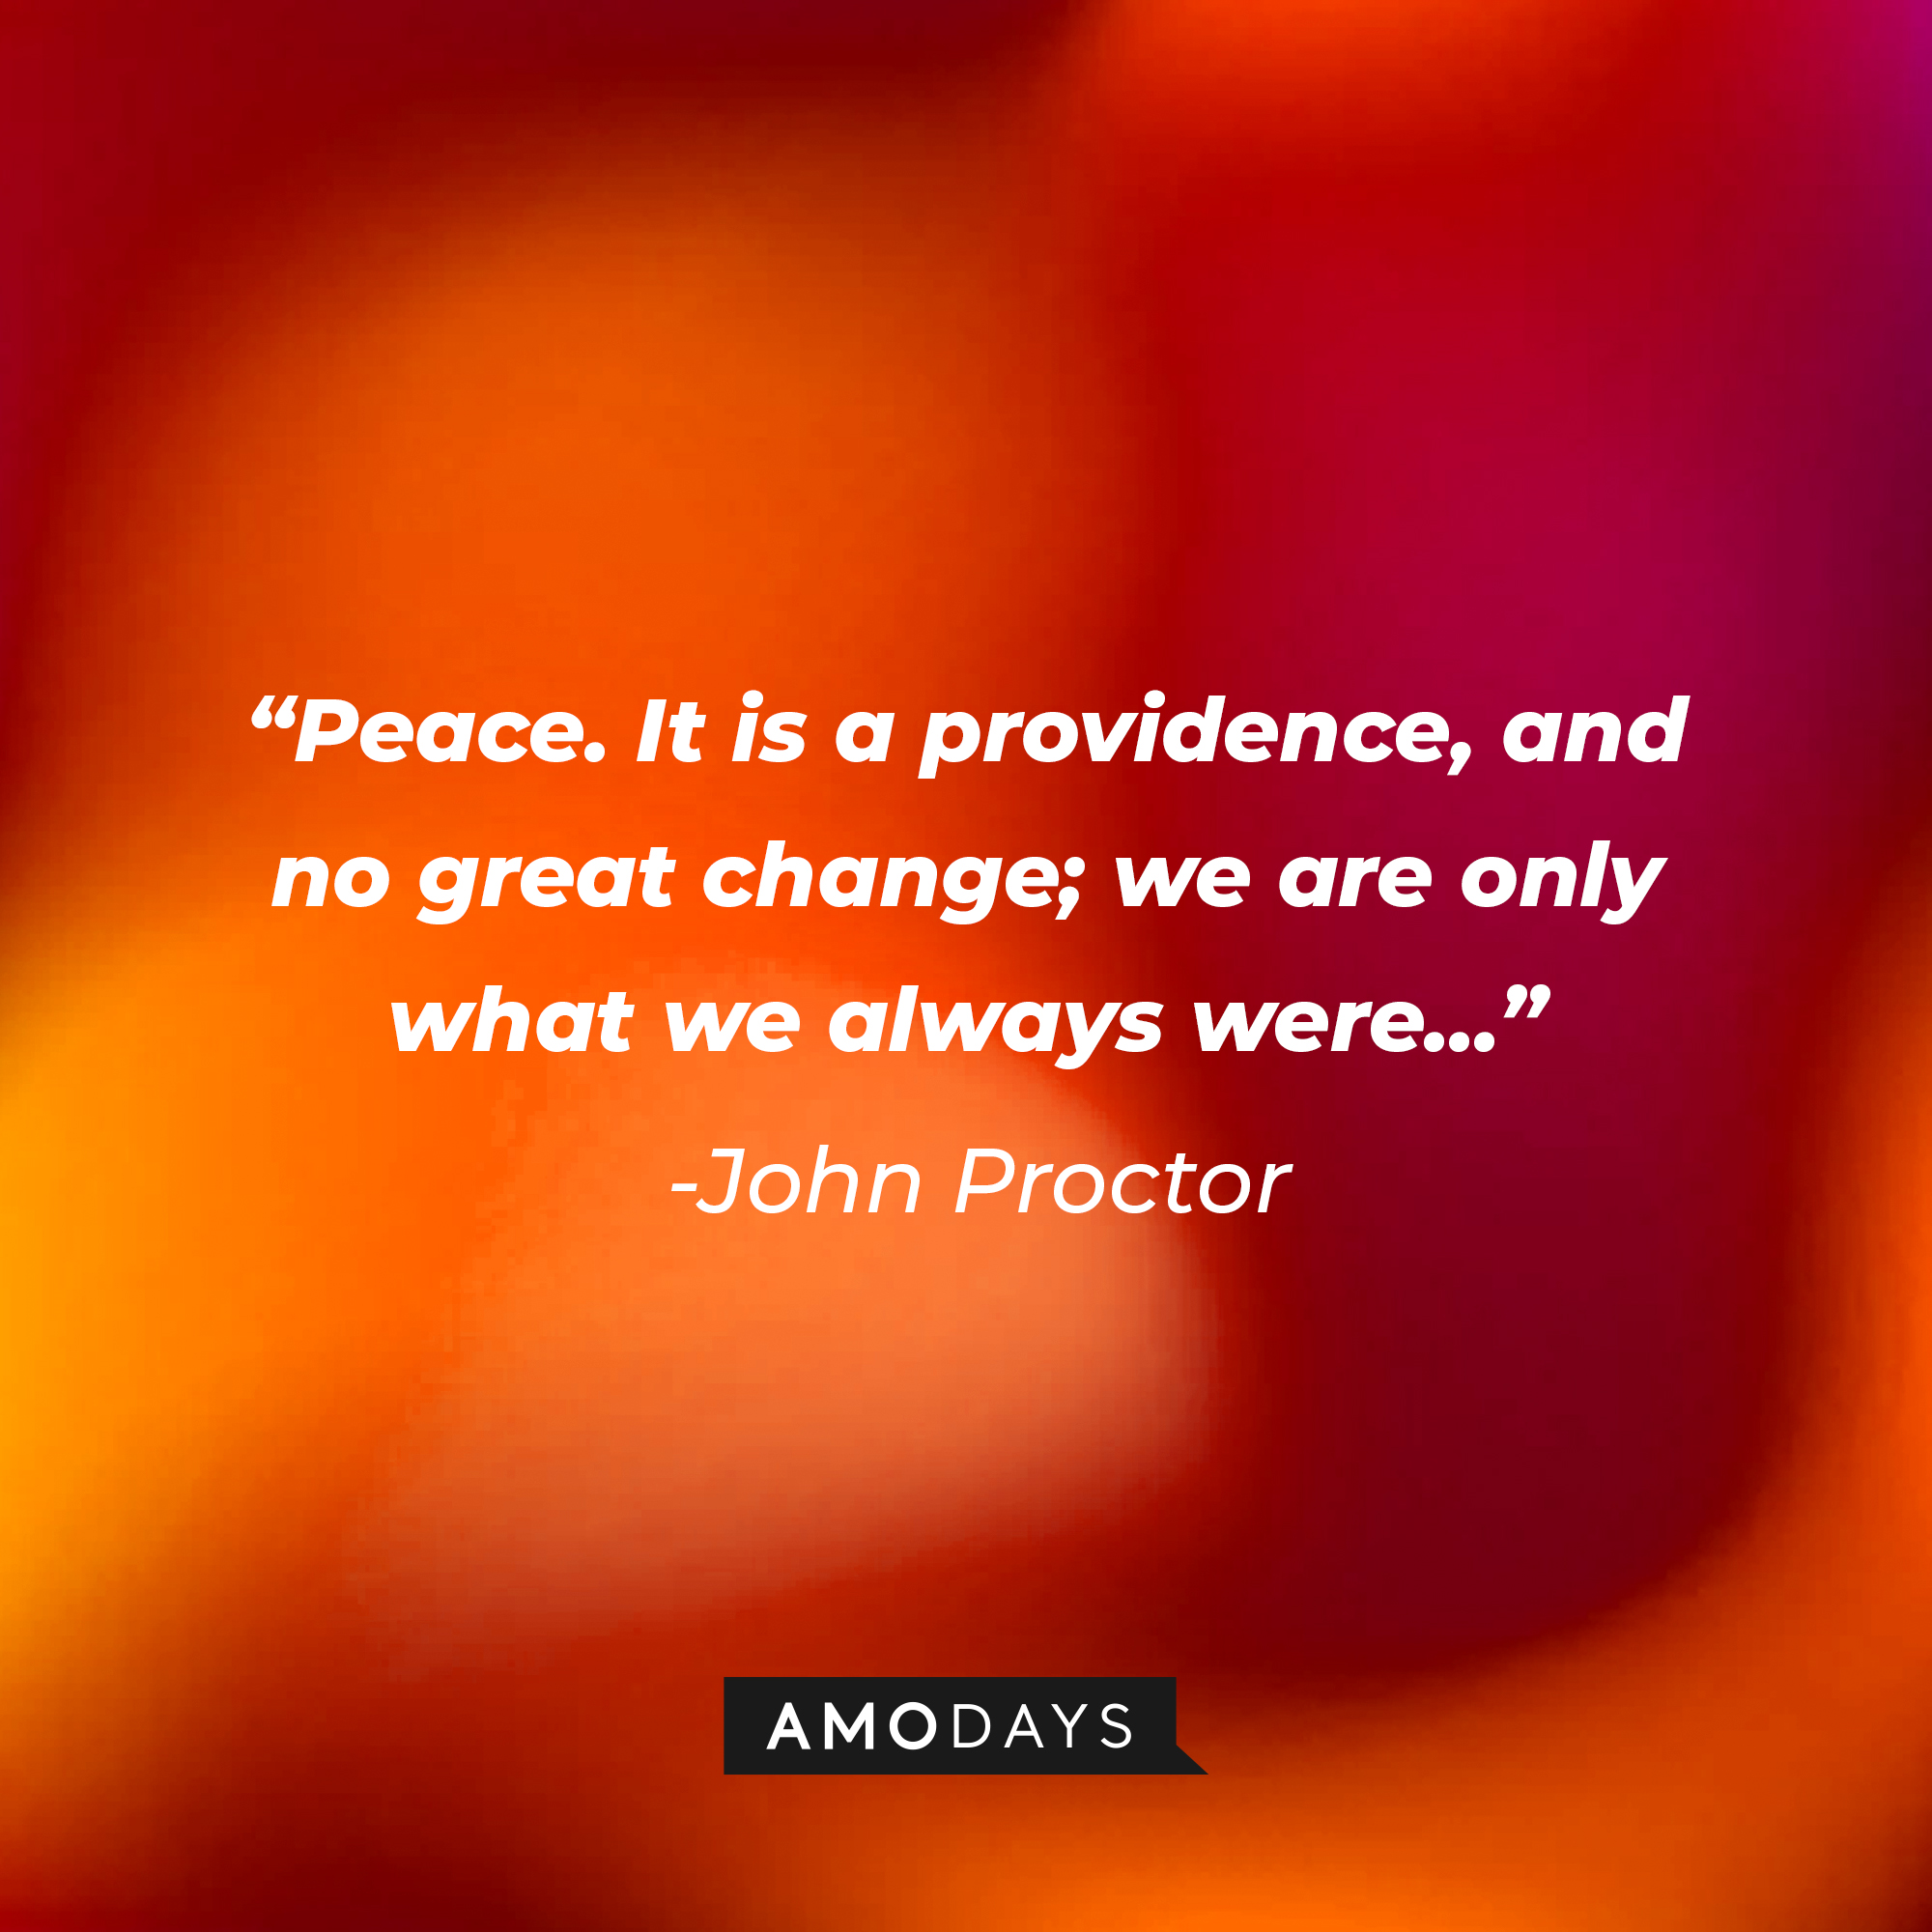 John Proctor's quote: "Peace. It is a providence, and no great change; we are only what we always were..." | Image: AmoDays